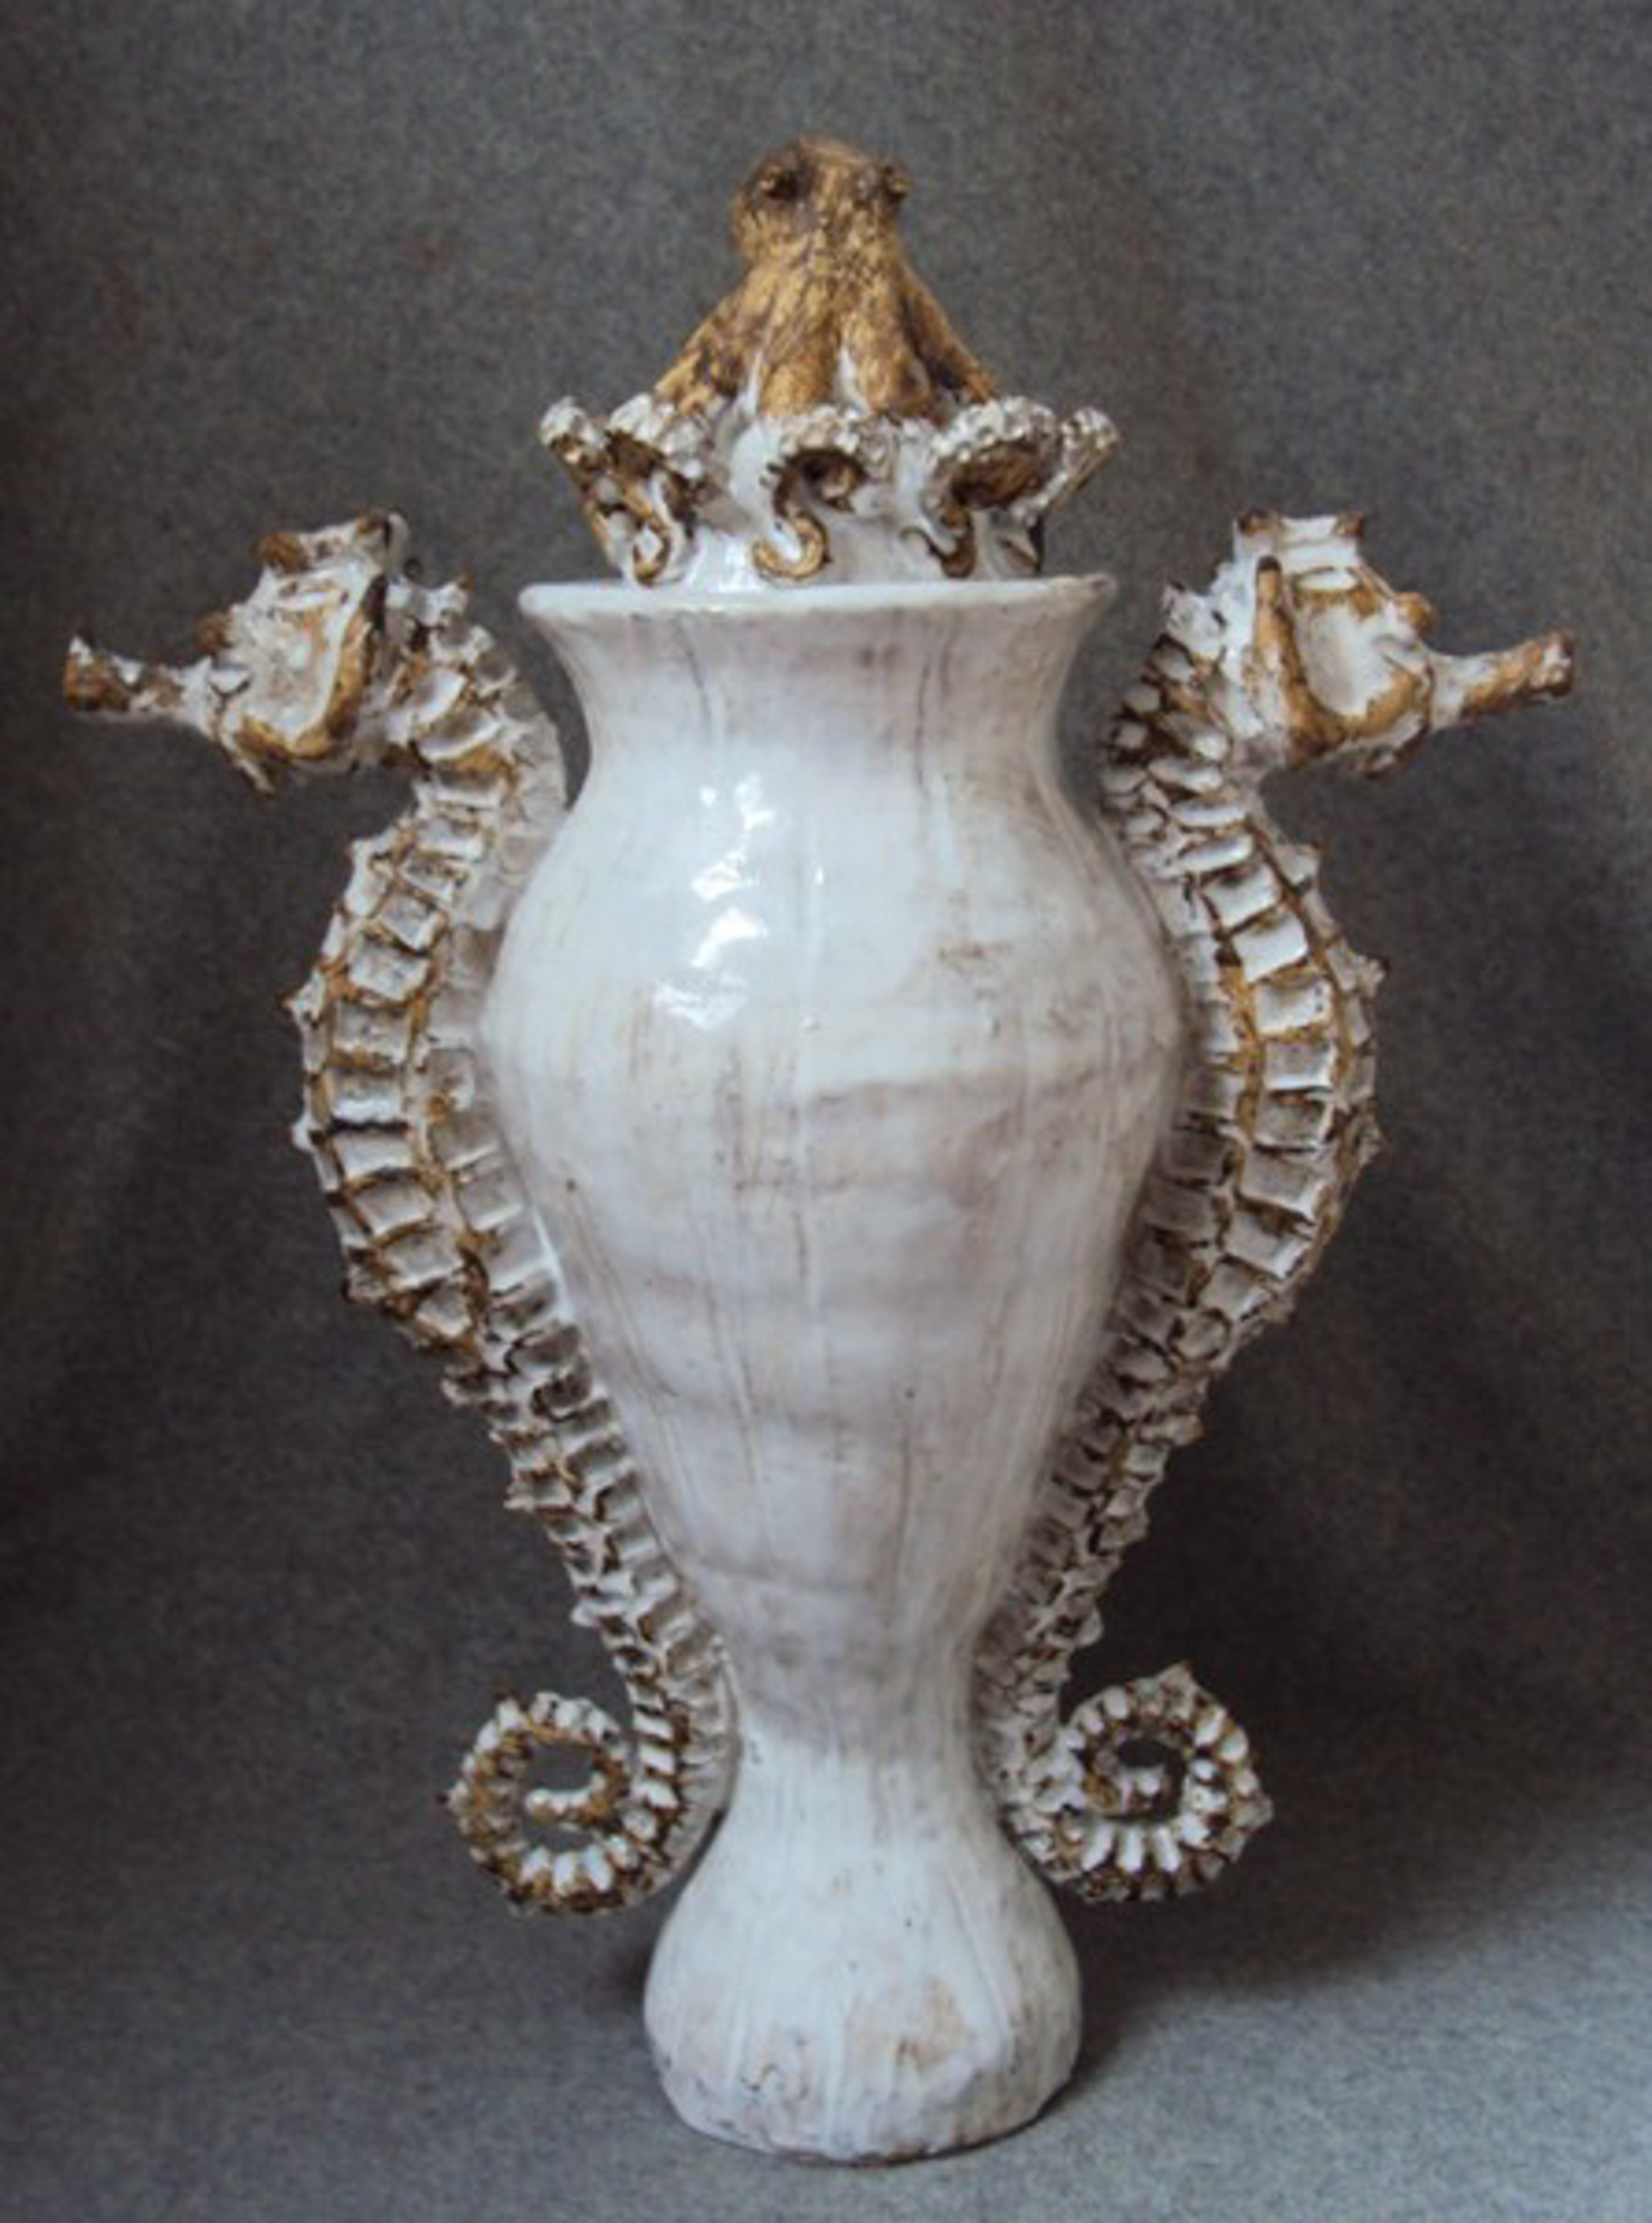 Seahorse Urn with Lid by Shayne Greco